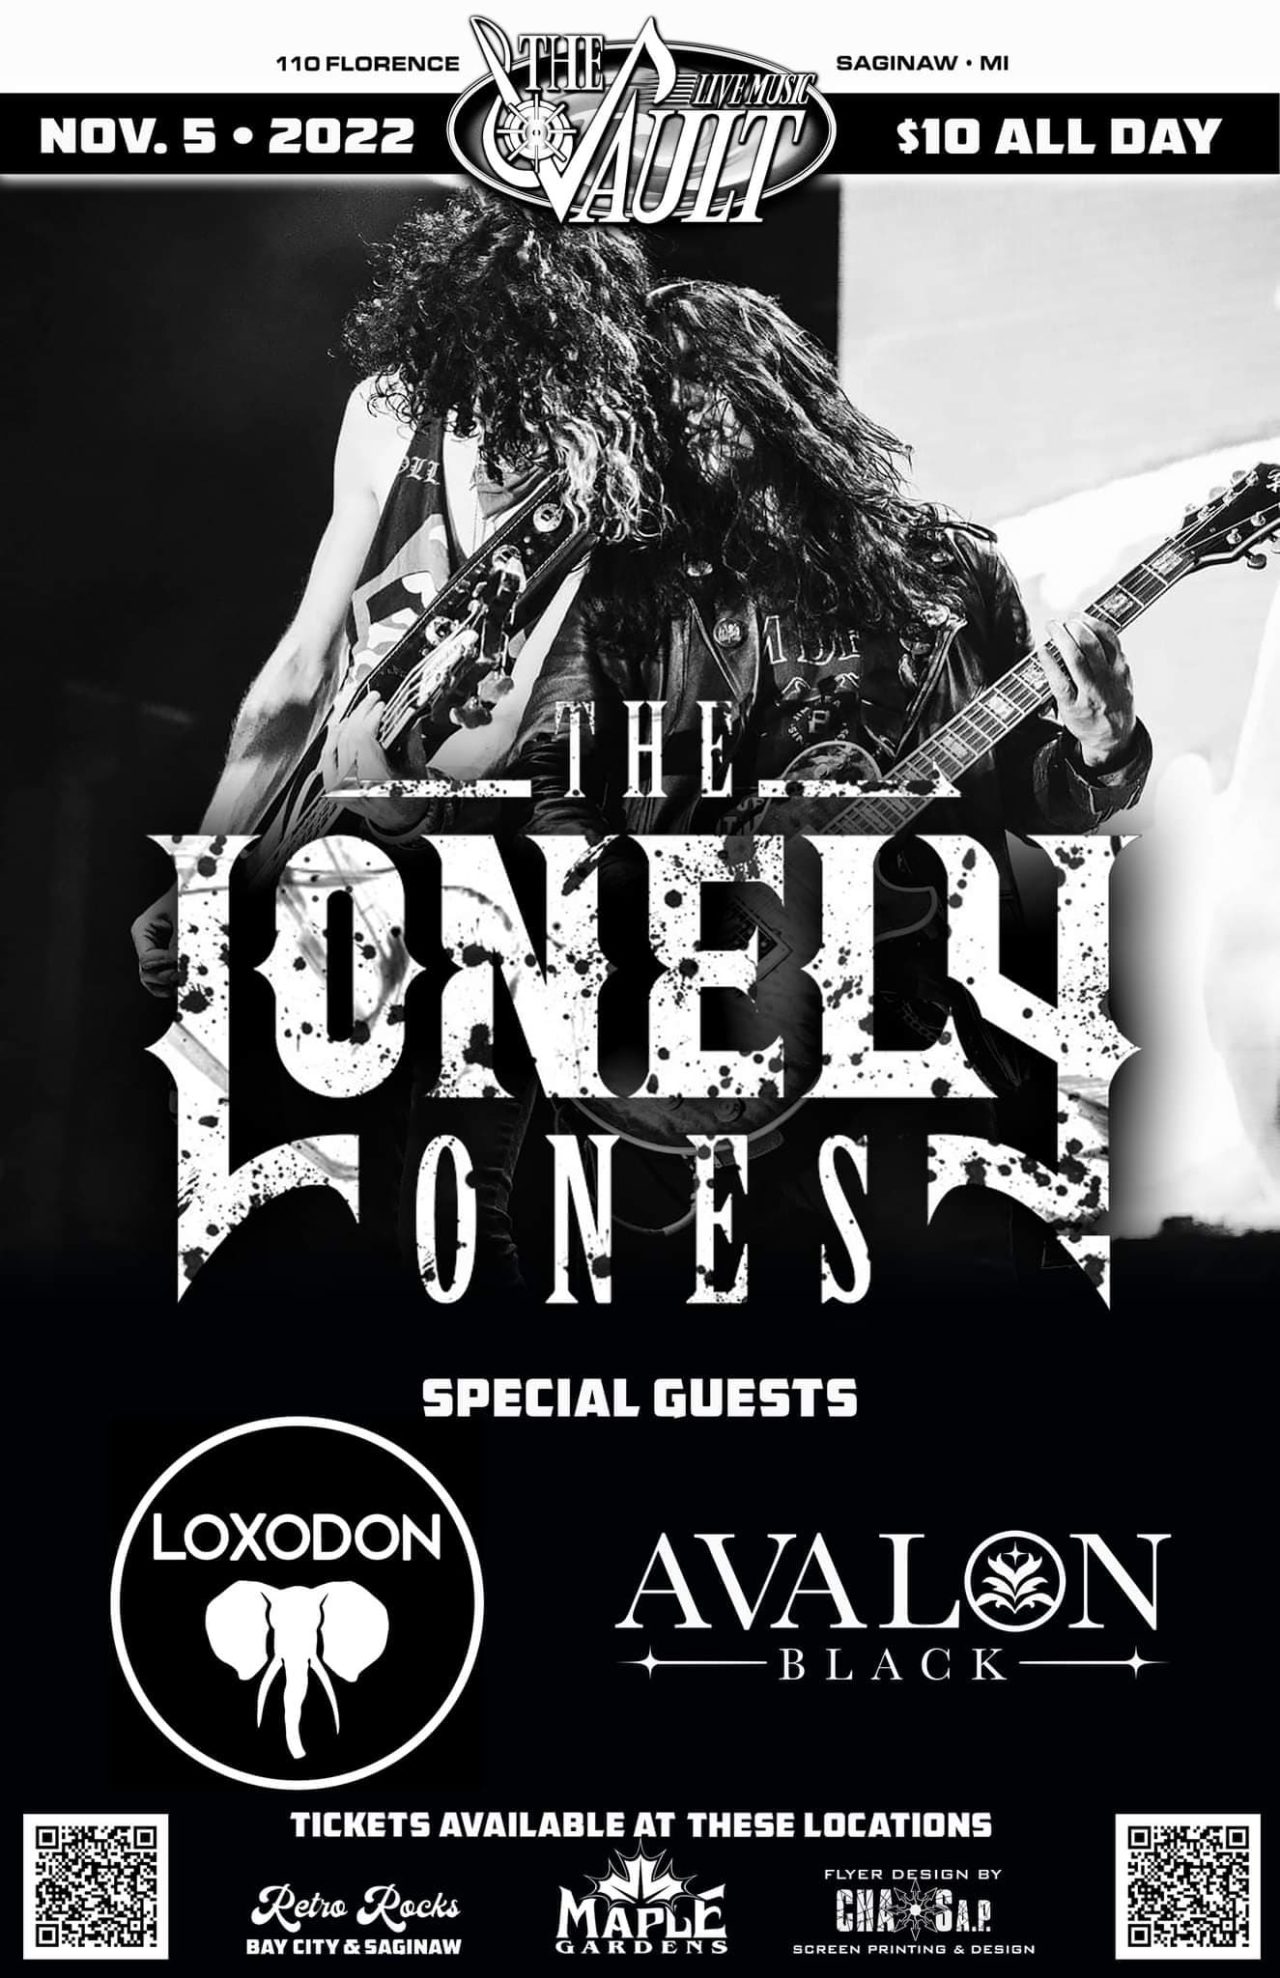 Loxodon at the vault november 5th with the Lonely Ones and Avalon Black